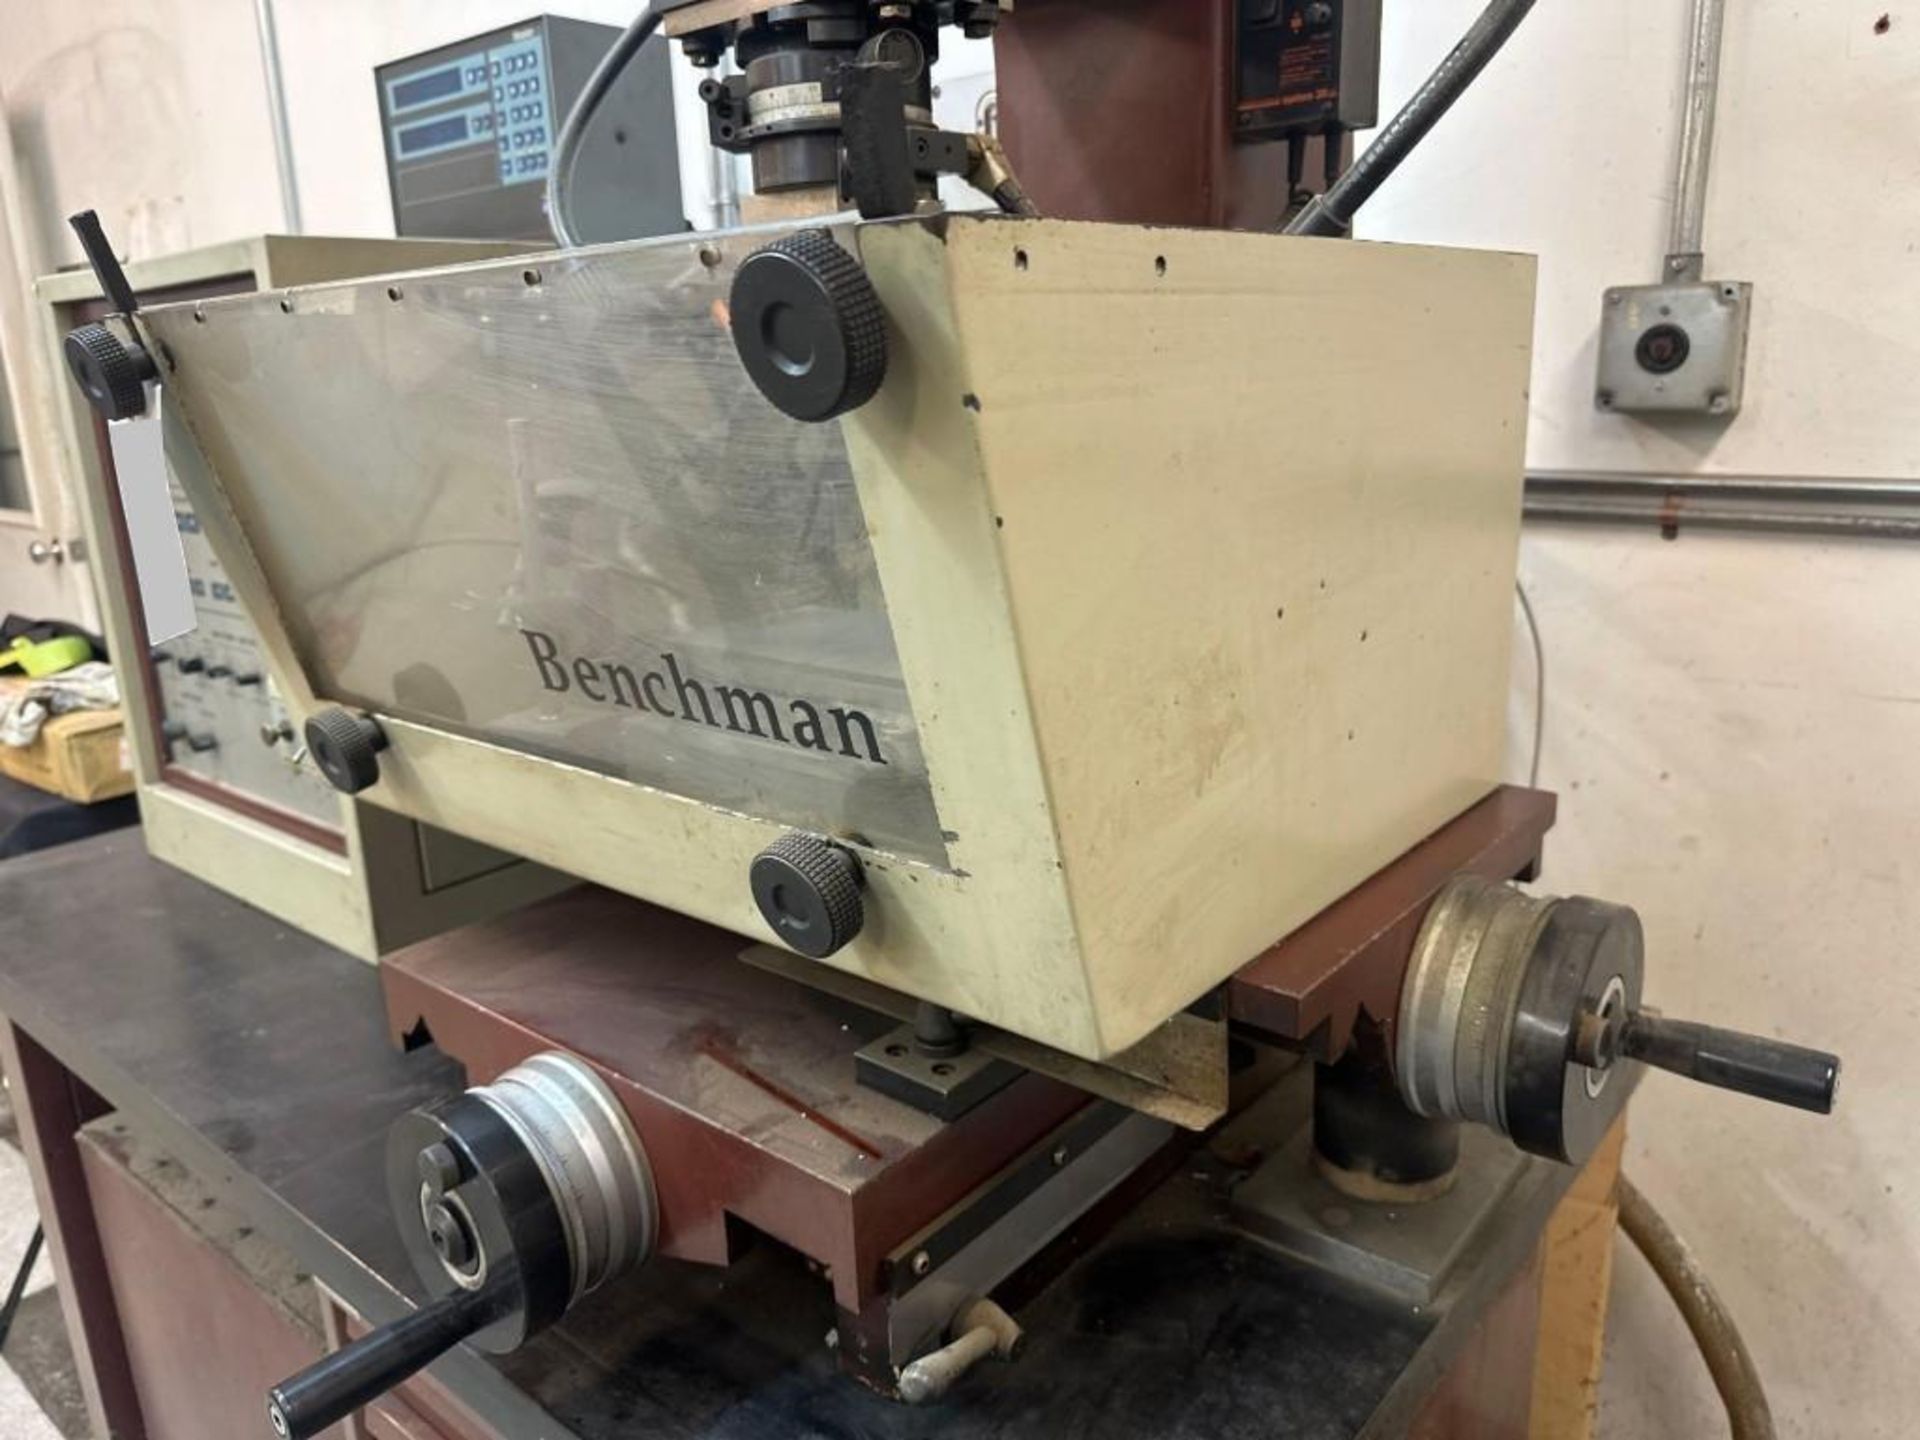 Hansvedt Benchman Sinker EDM, 20 Amps, Table Size: 9" x 14.1", X-Axis 8.4", Y-Axis 5.5" - Image 7 of 9